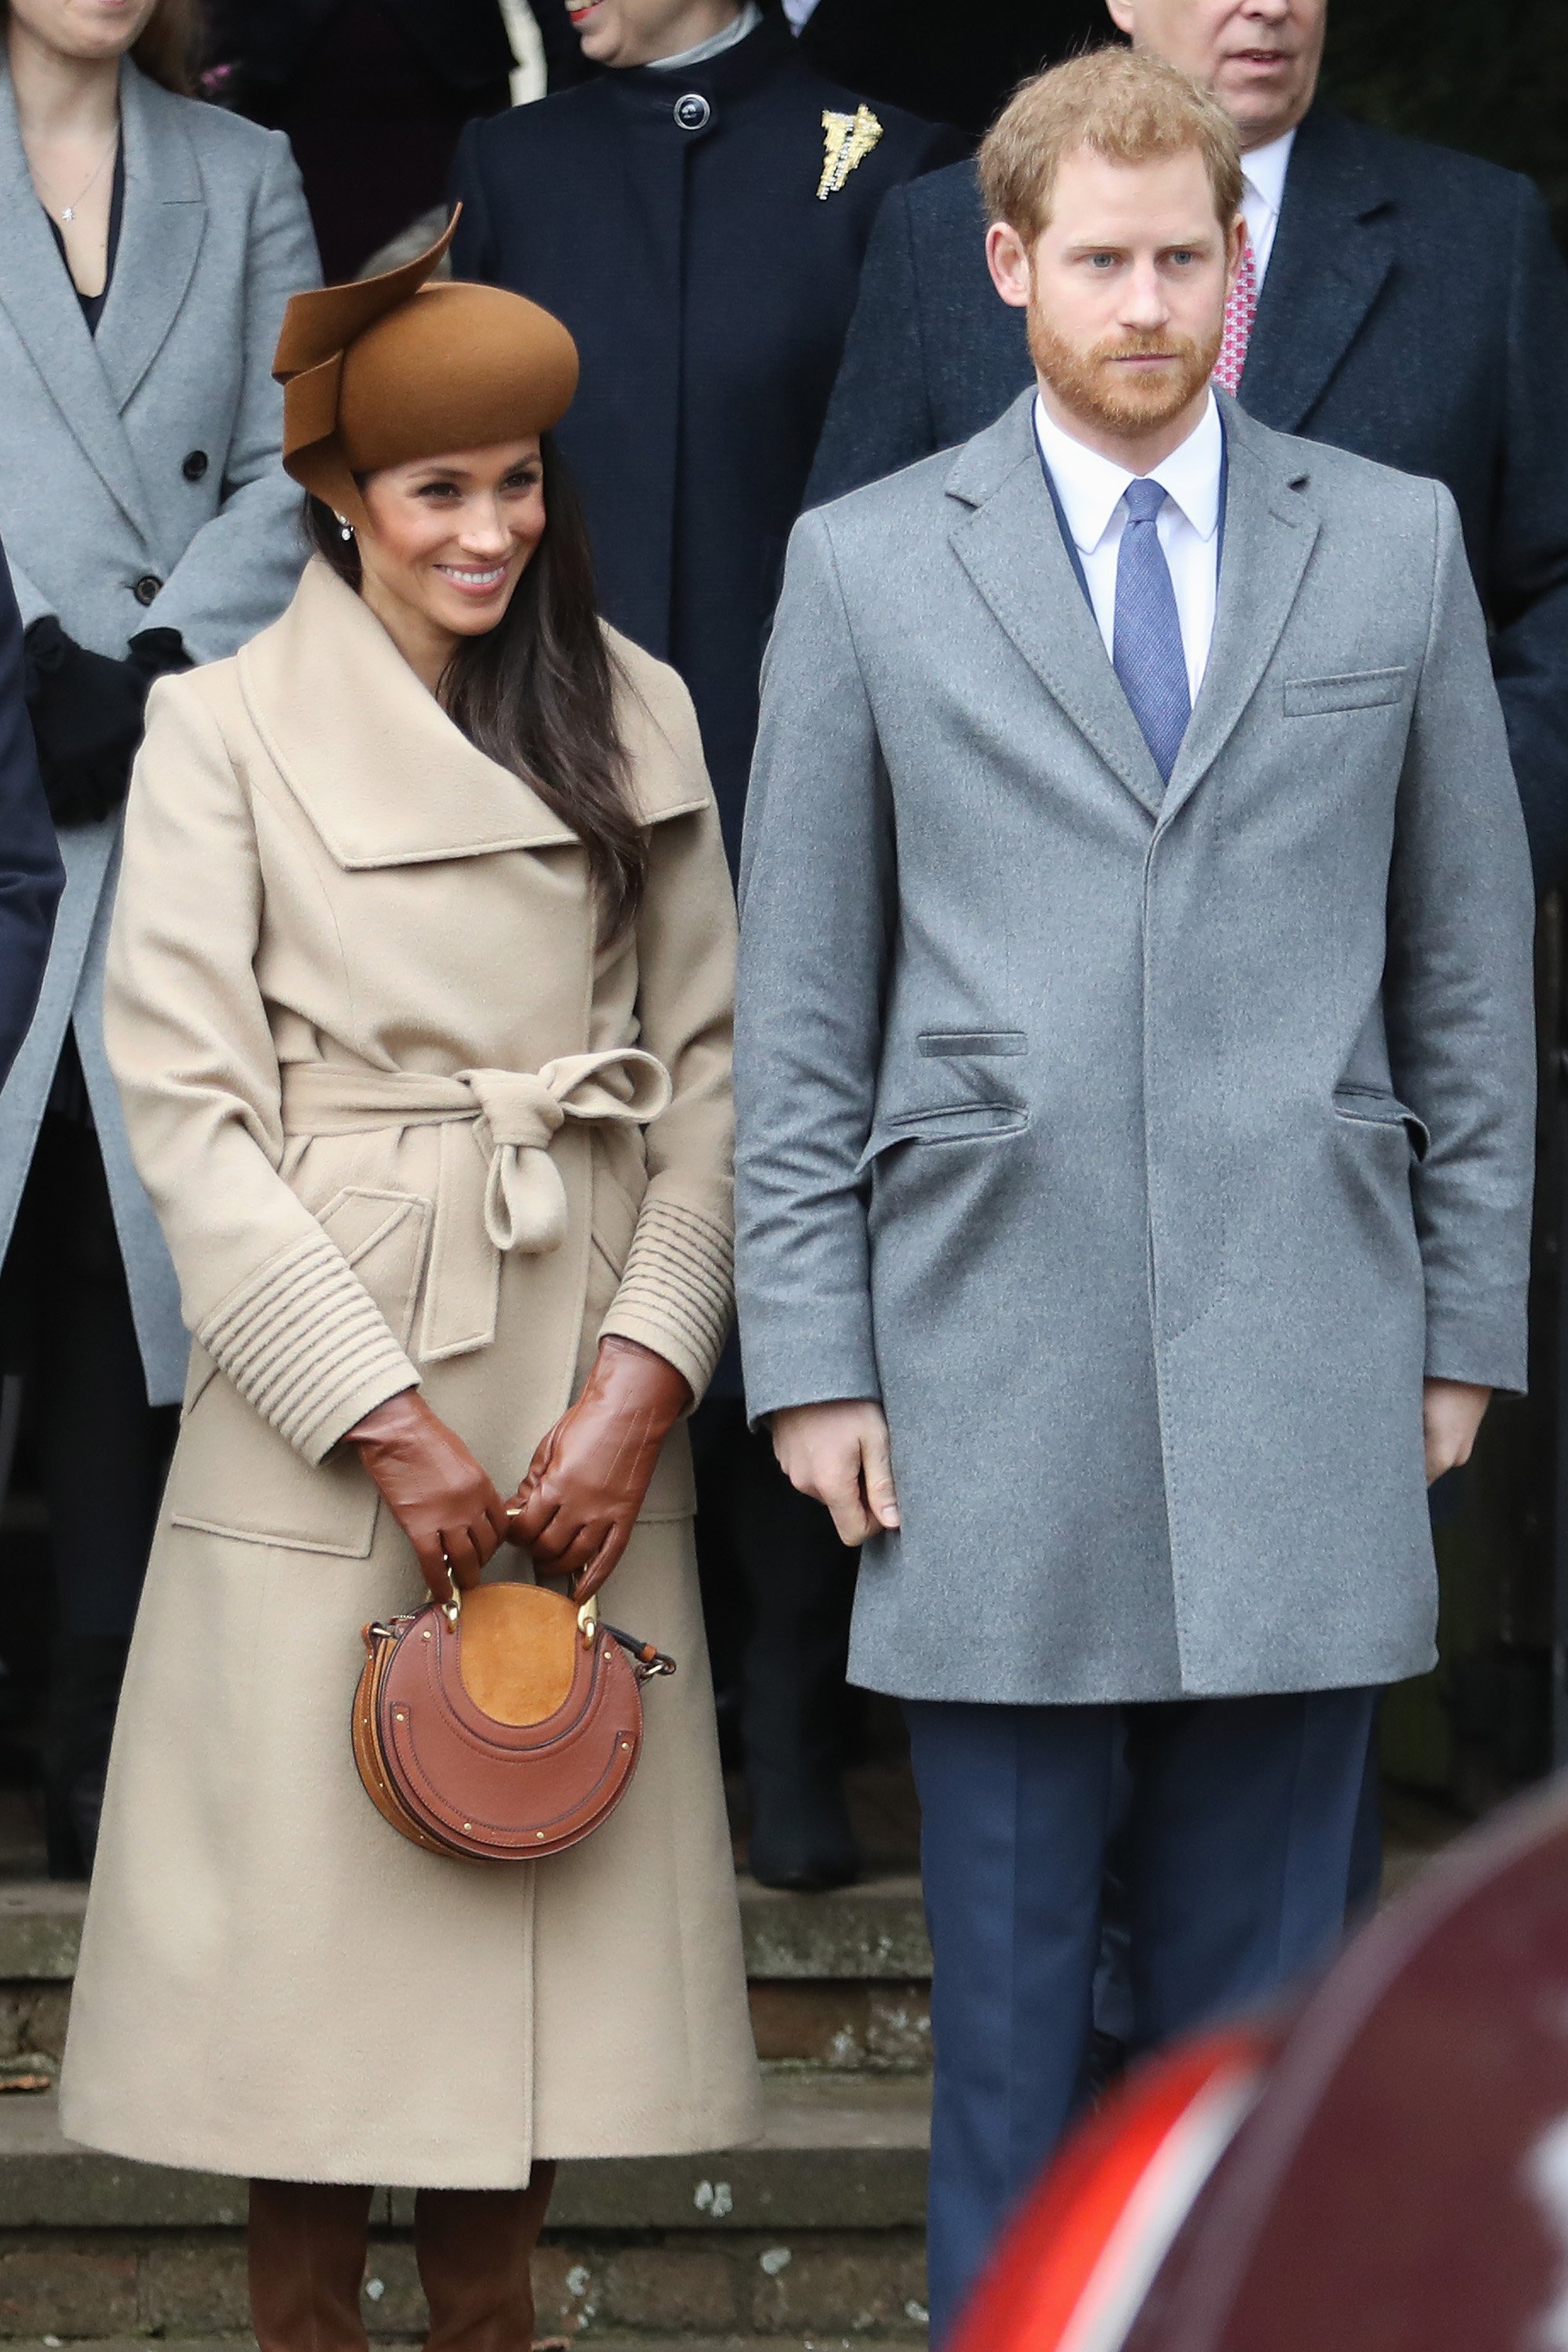 Meghan Markle and Prince Harry attend Christmas Day Church service at Church of St Mary Magdalene on December 25, 2017 in King's Lynn, England ┃Source: Getty Images